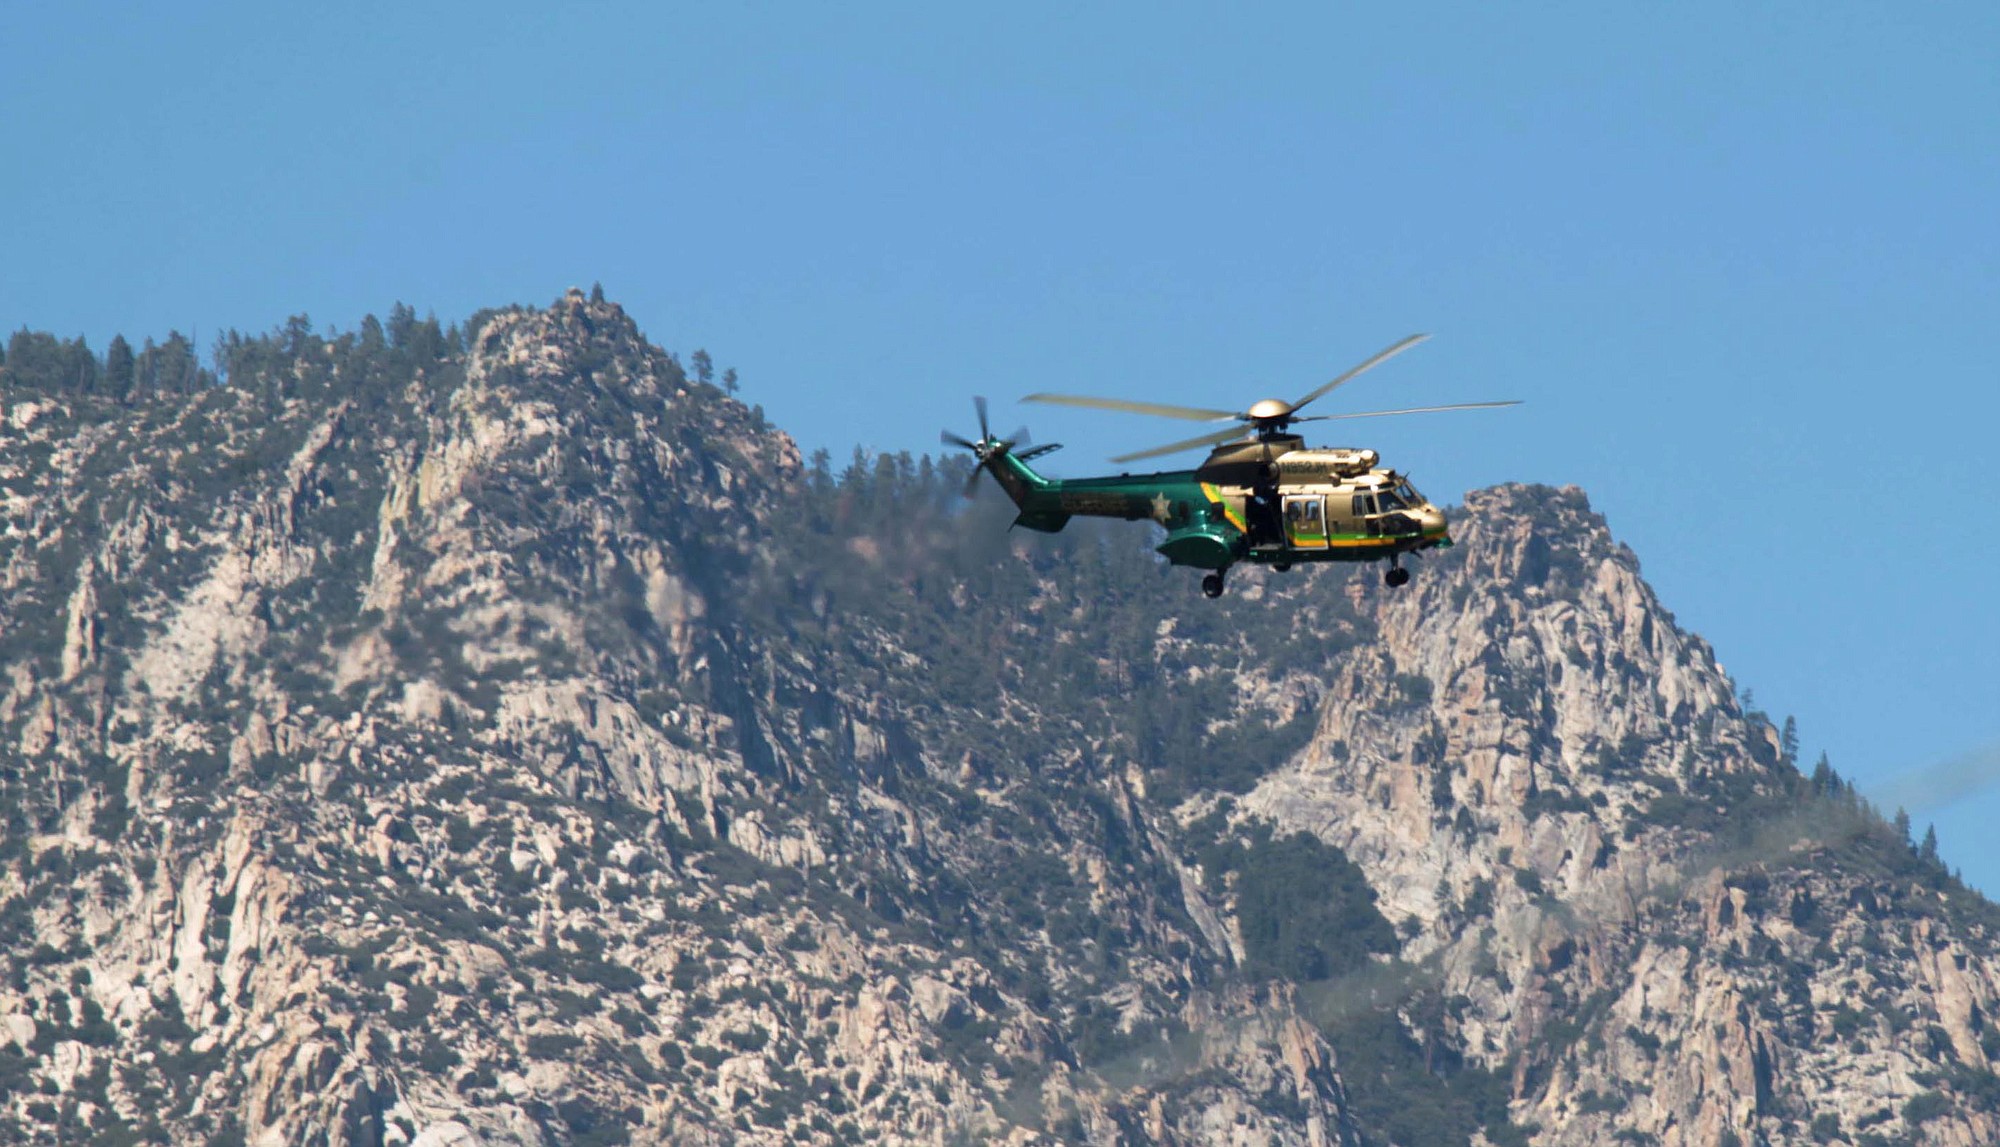 A Los Angeles County Sheriff's helicopter flies near Weldon, Calif.